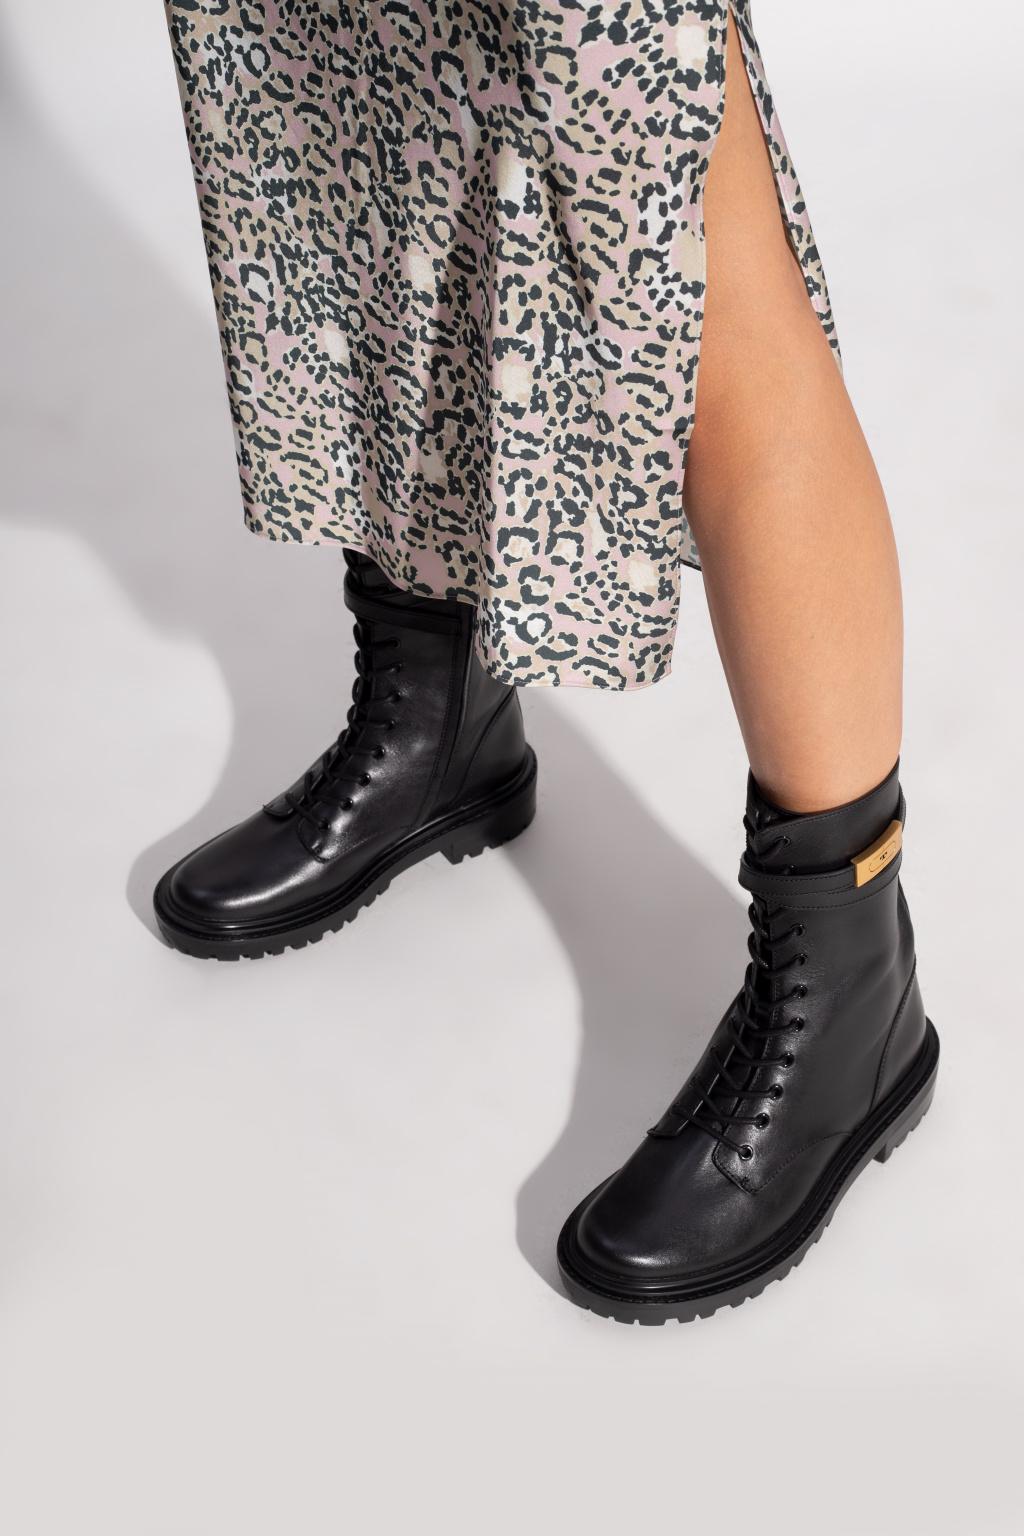 Tory Burch Lace-up Boots \u201eT Hardware Combat Boot Perfect\u201c black Shoes High Boots Lace-up Boots 